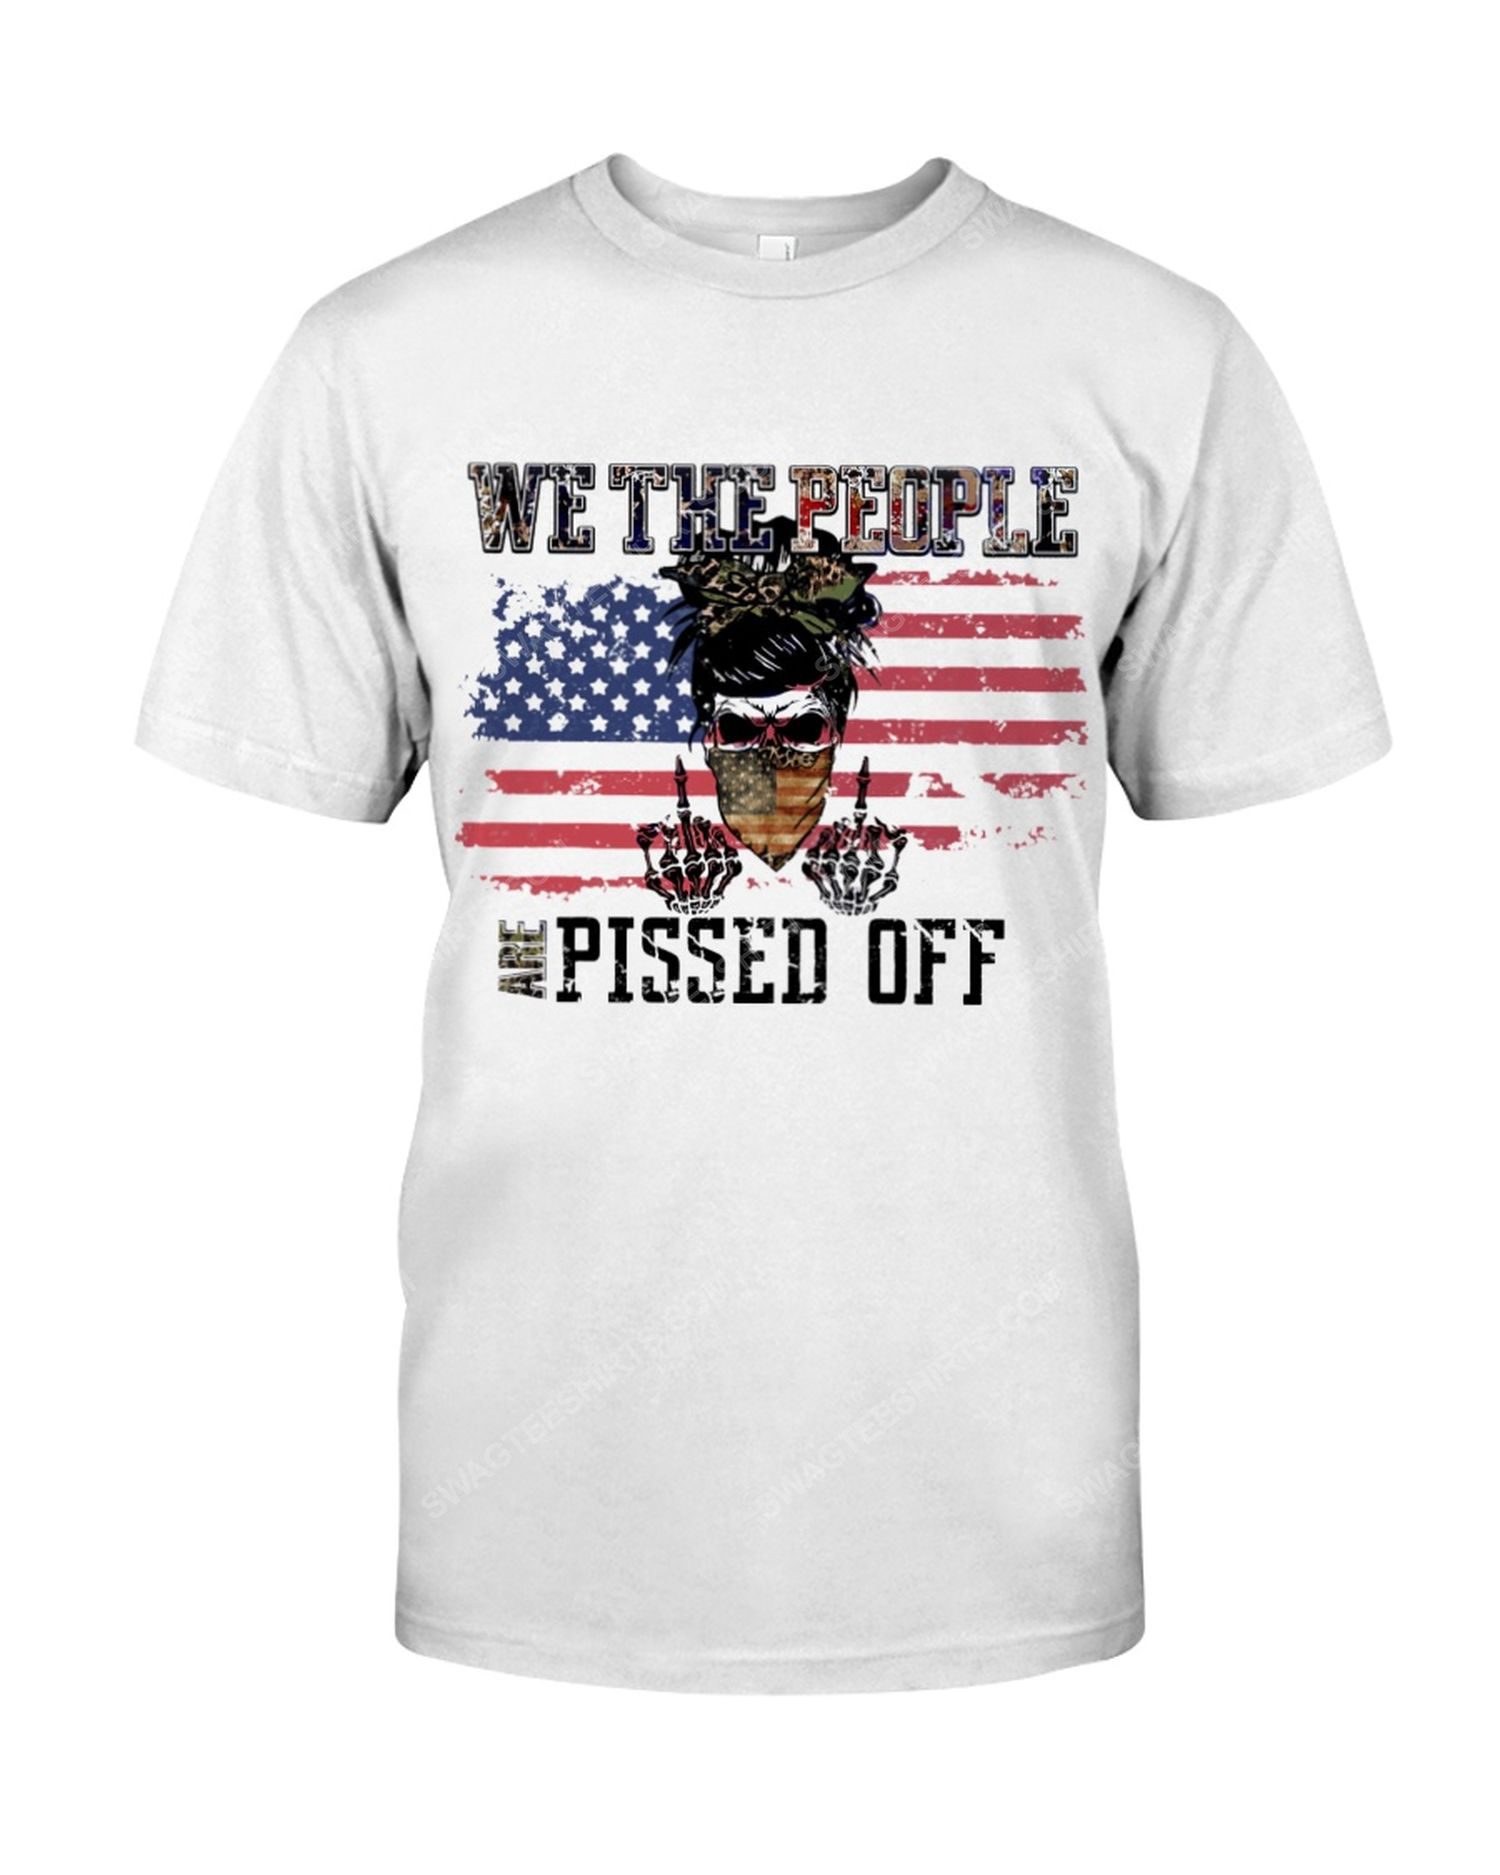 We the people are pissed off fight for democracy political tshirt